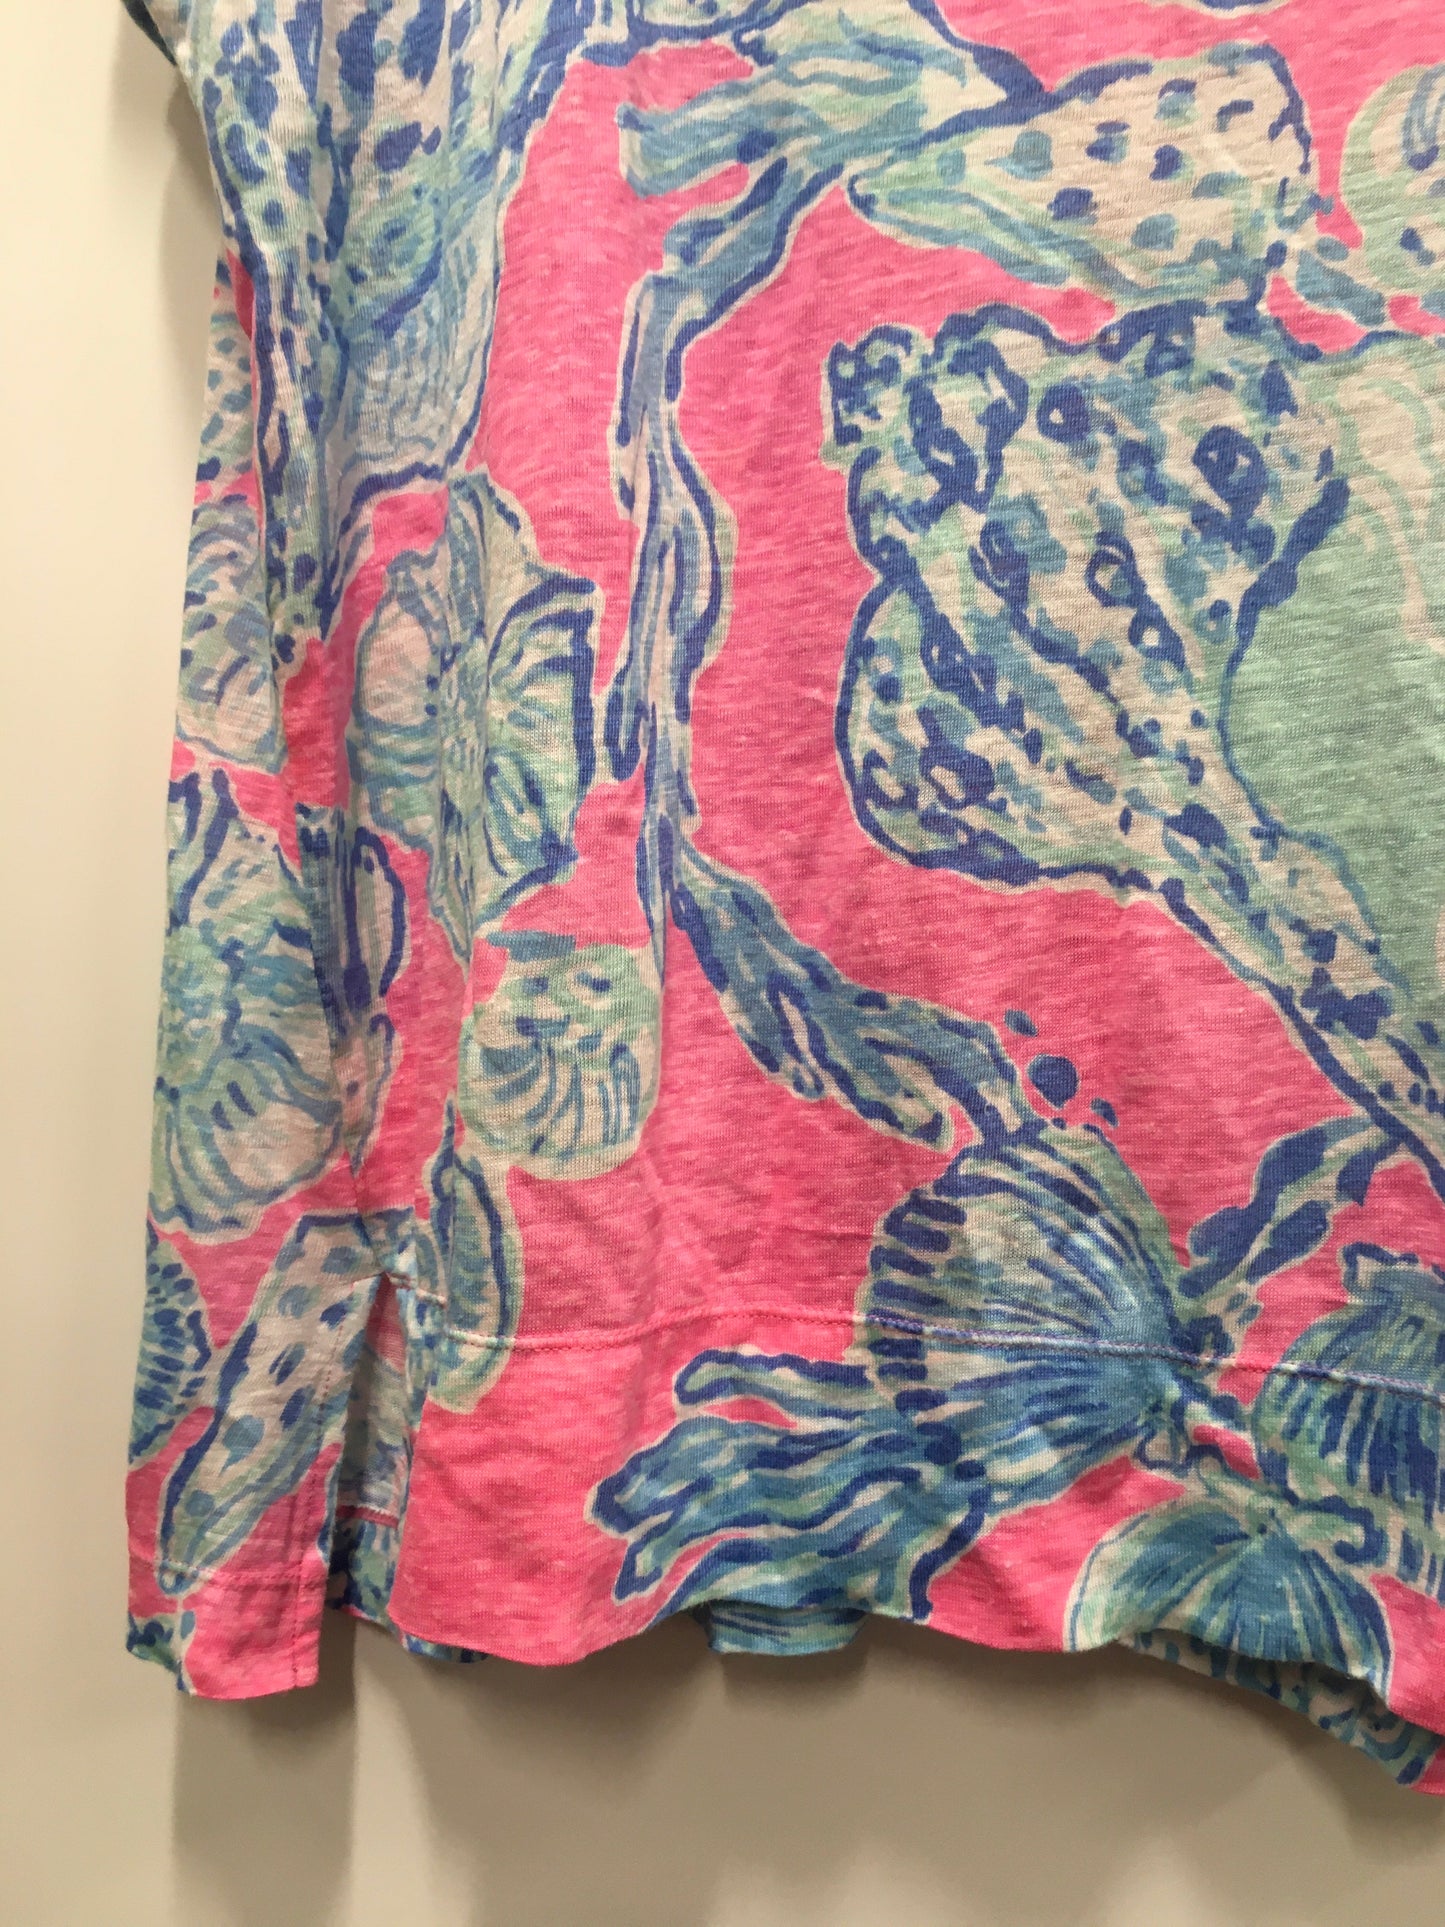 Pink Top Short Sleeve Lilly Pulitzer, Size Xl